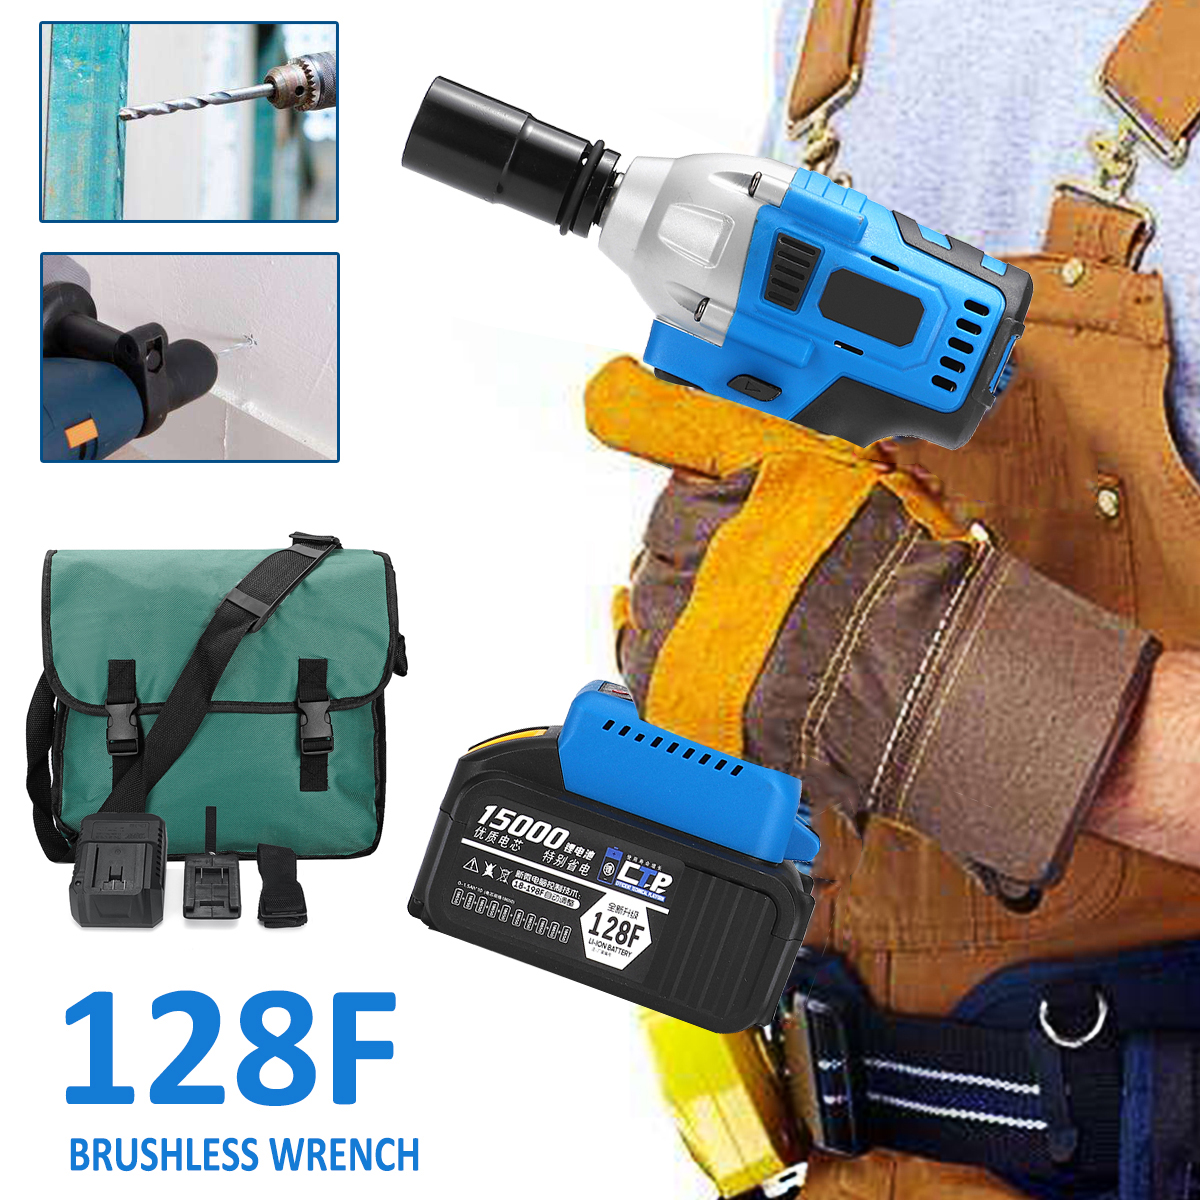 Electric-Screwdriver-Brushless-Cordless-Drill-Wireless-Electric-Wrench-Impact-Power-Tools-With-2-Bat-1380494-2